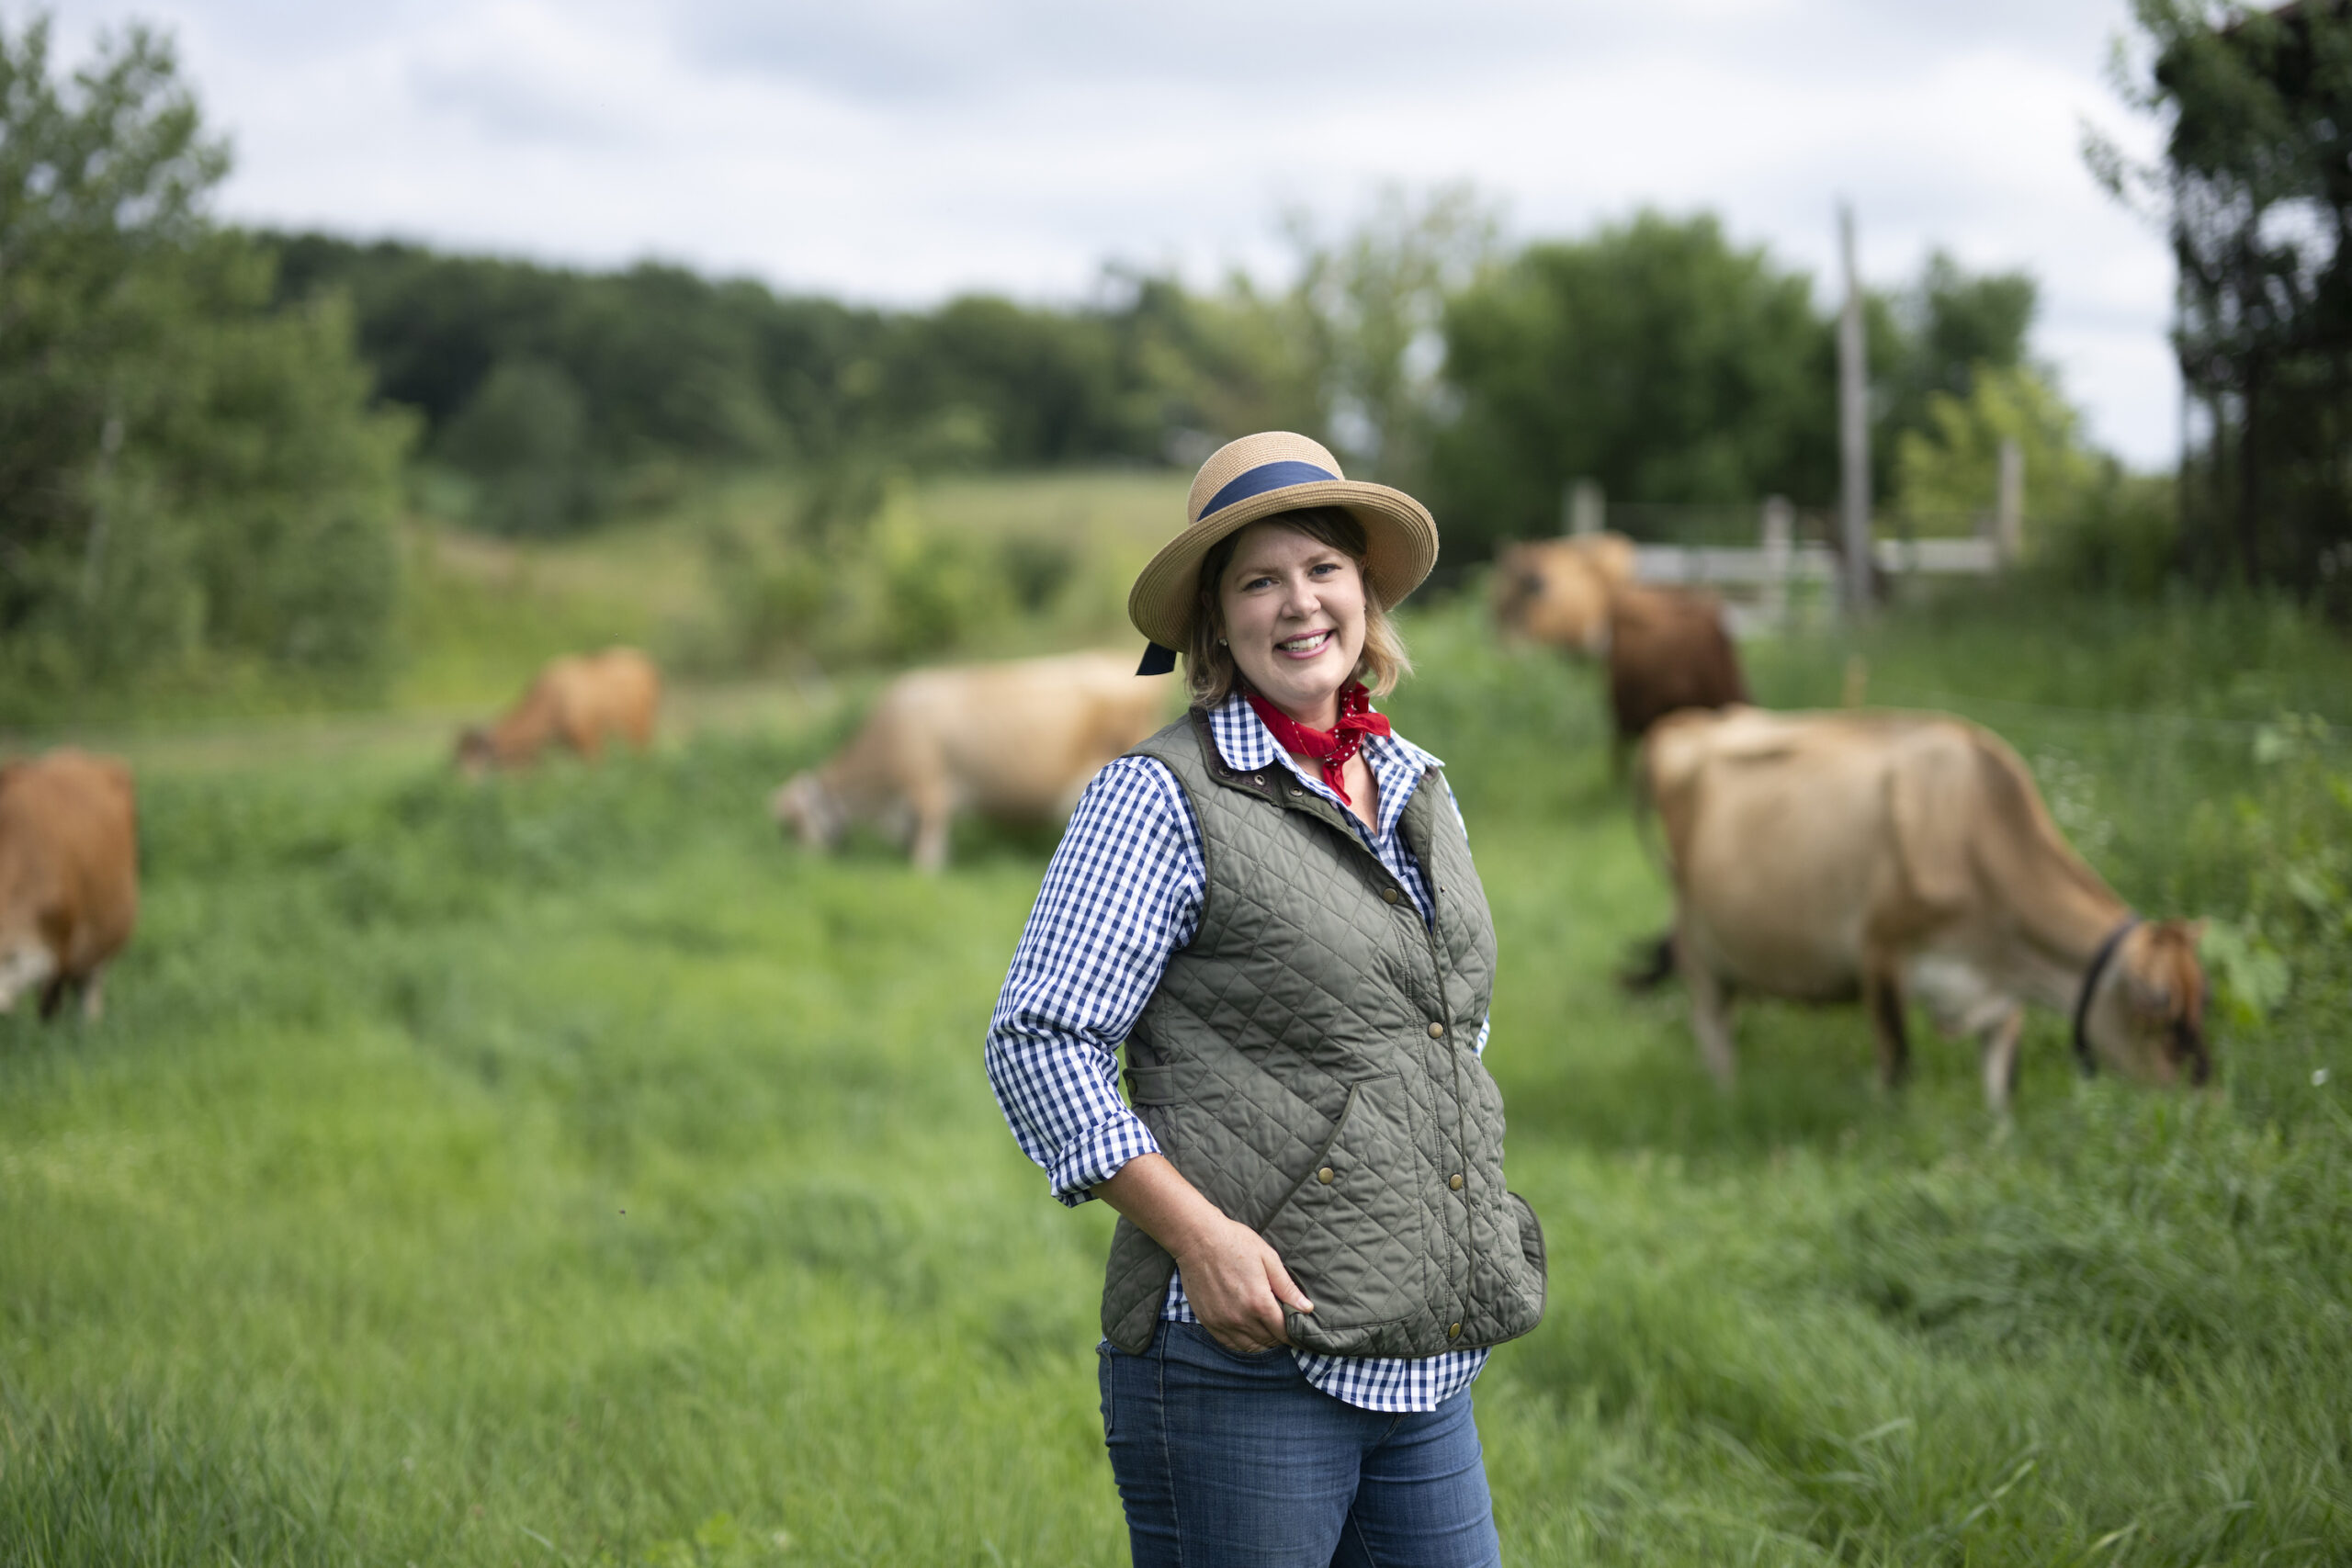 A white woman wearing a hat stands in front of brown cows grazing in a field.